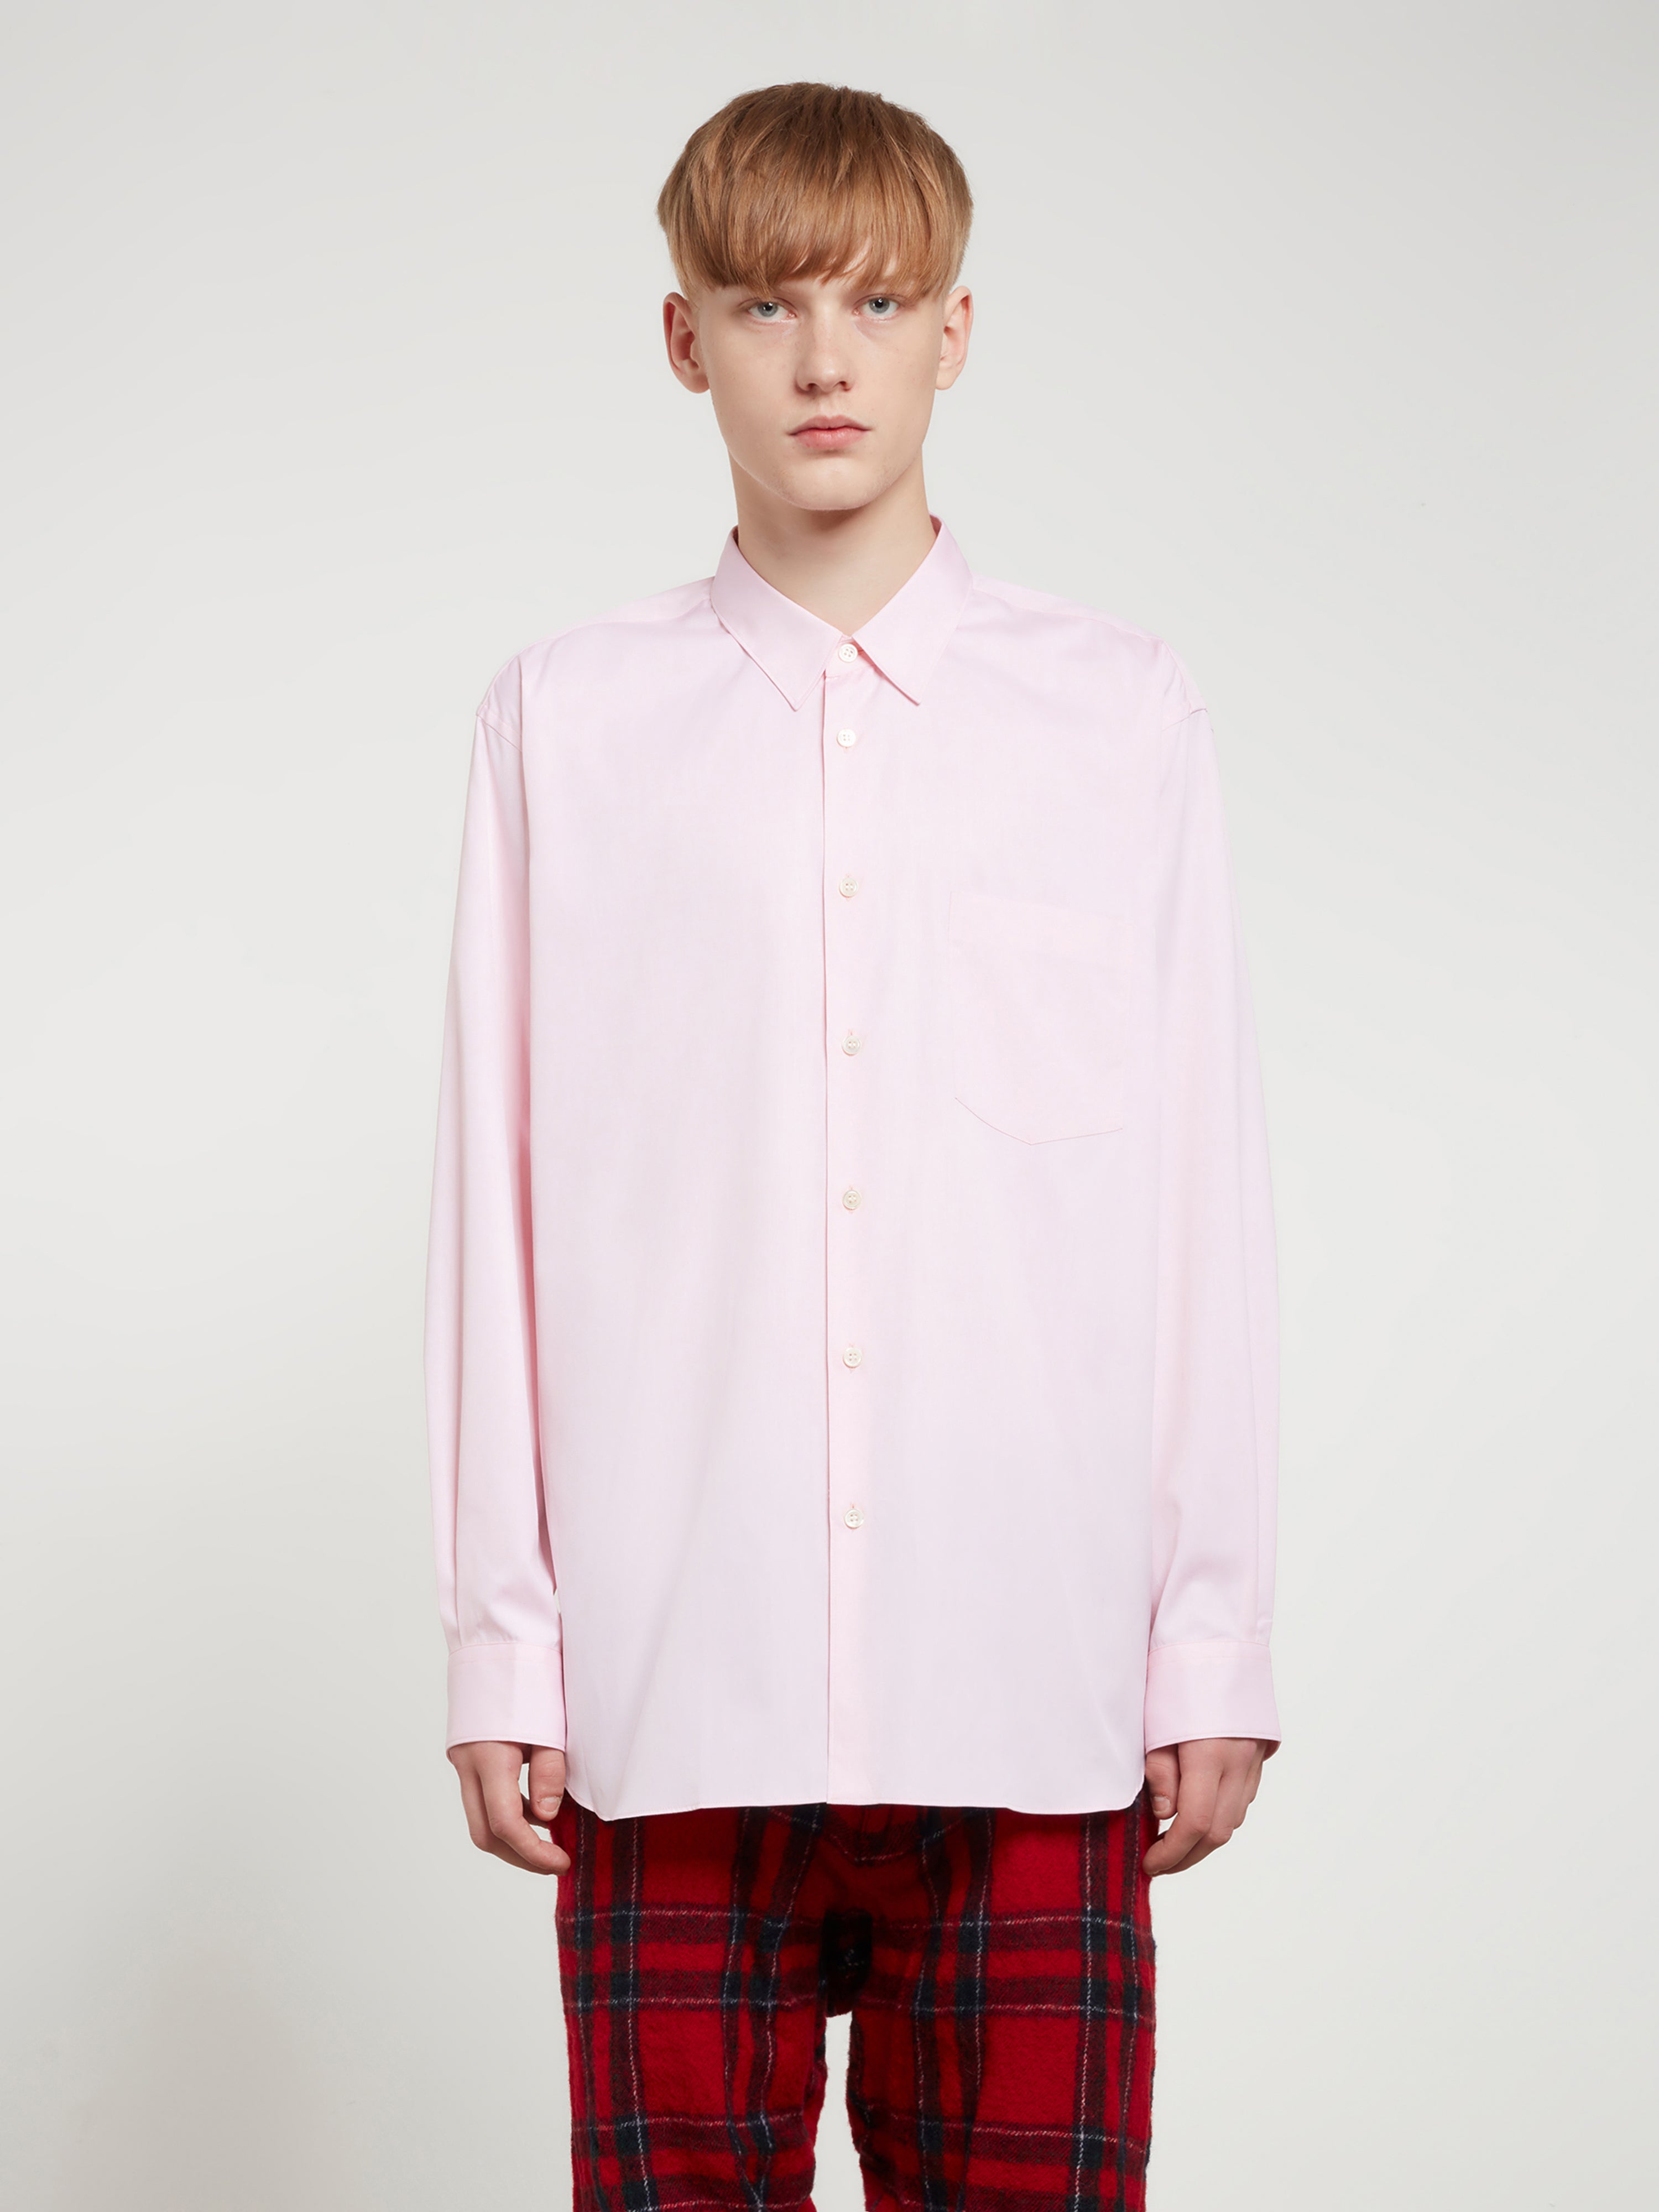 CDG Shirt Forever - Wide Fit Cotton Shirt - (Pink)